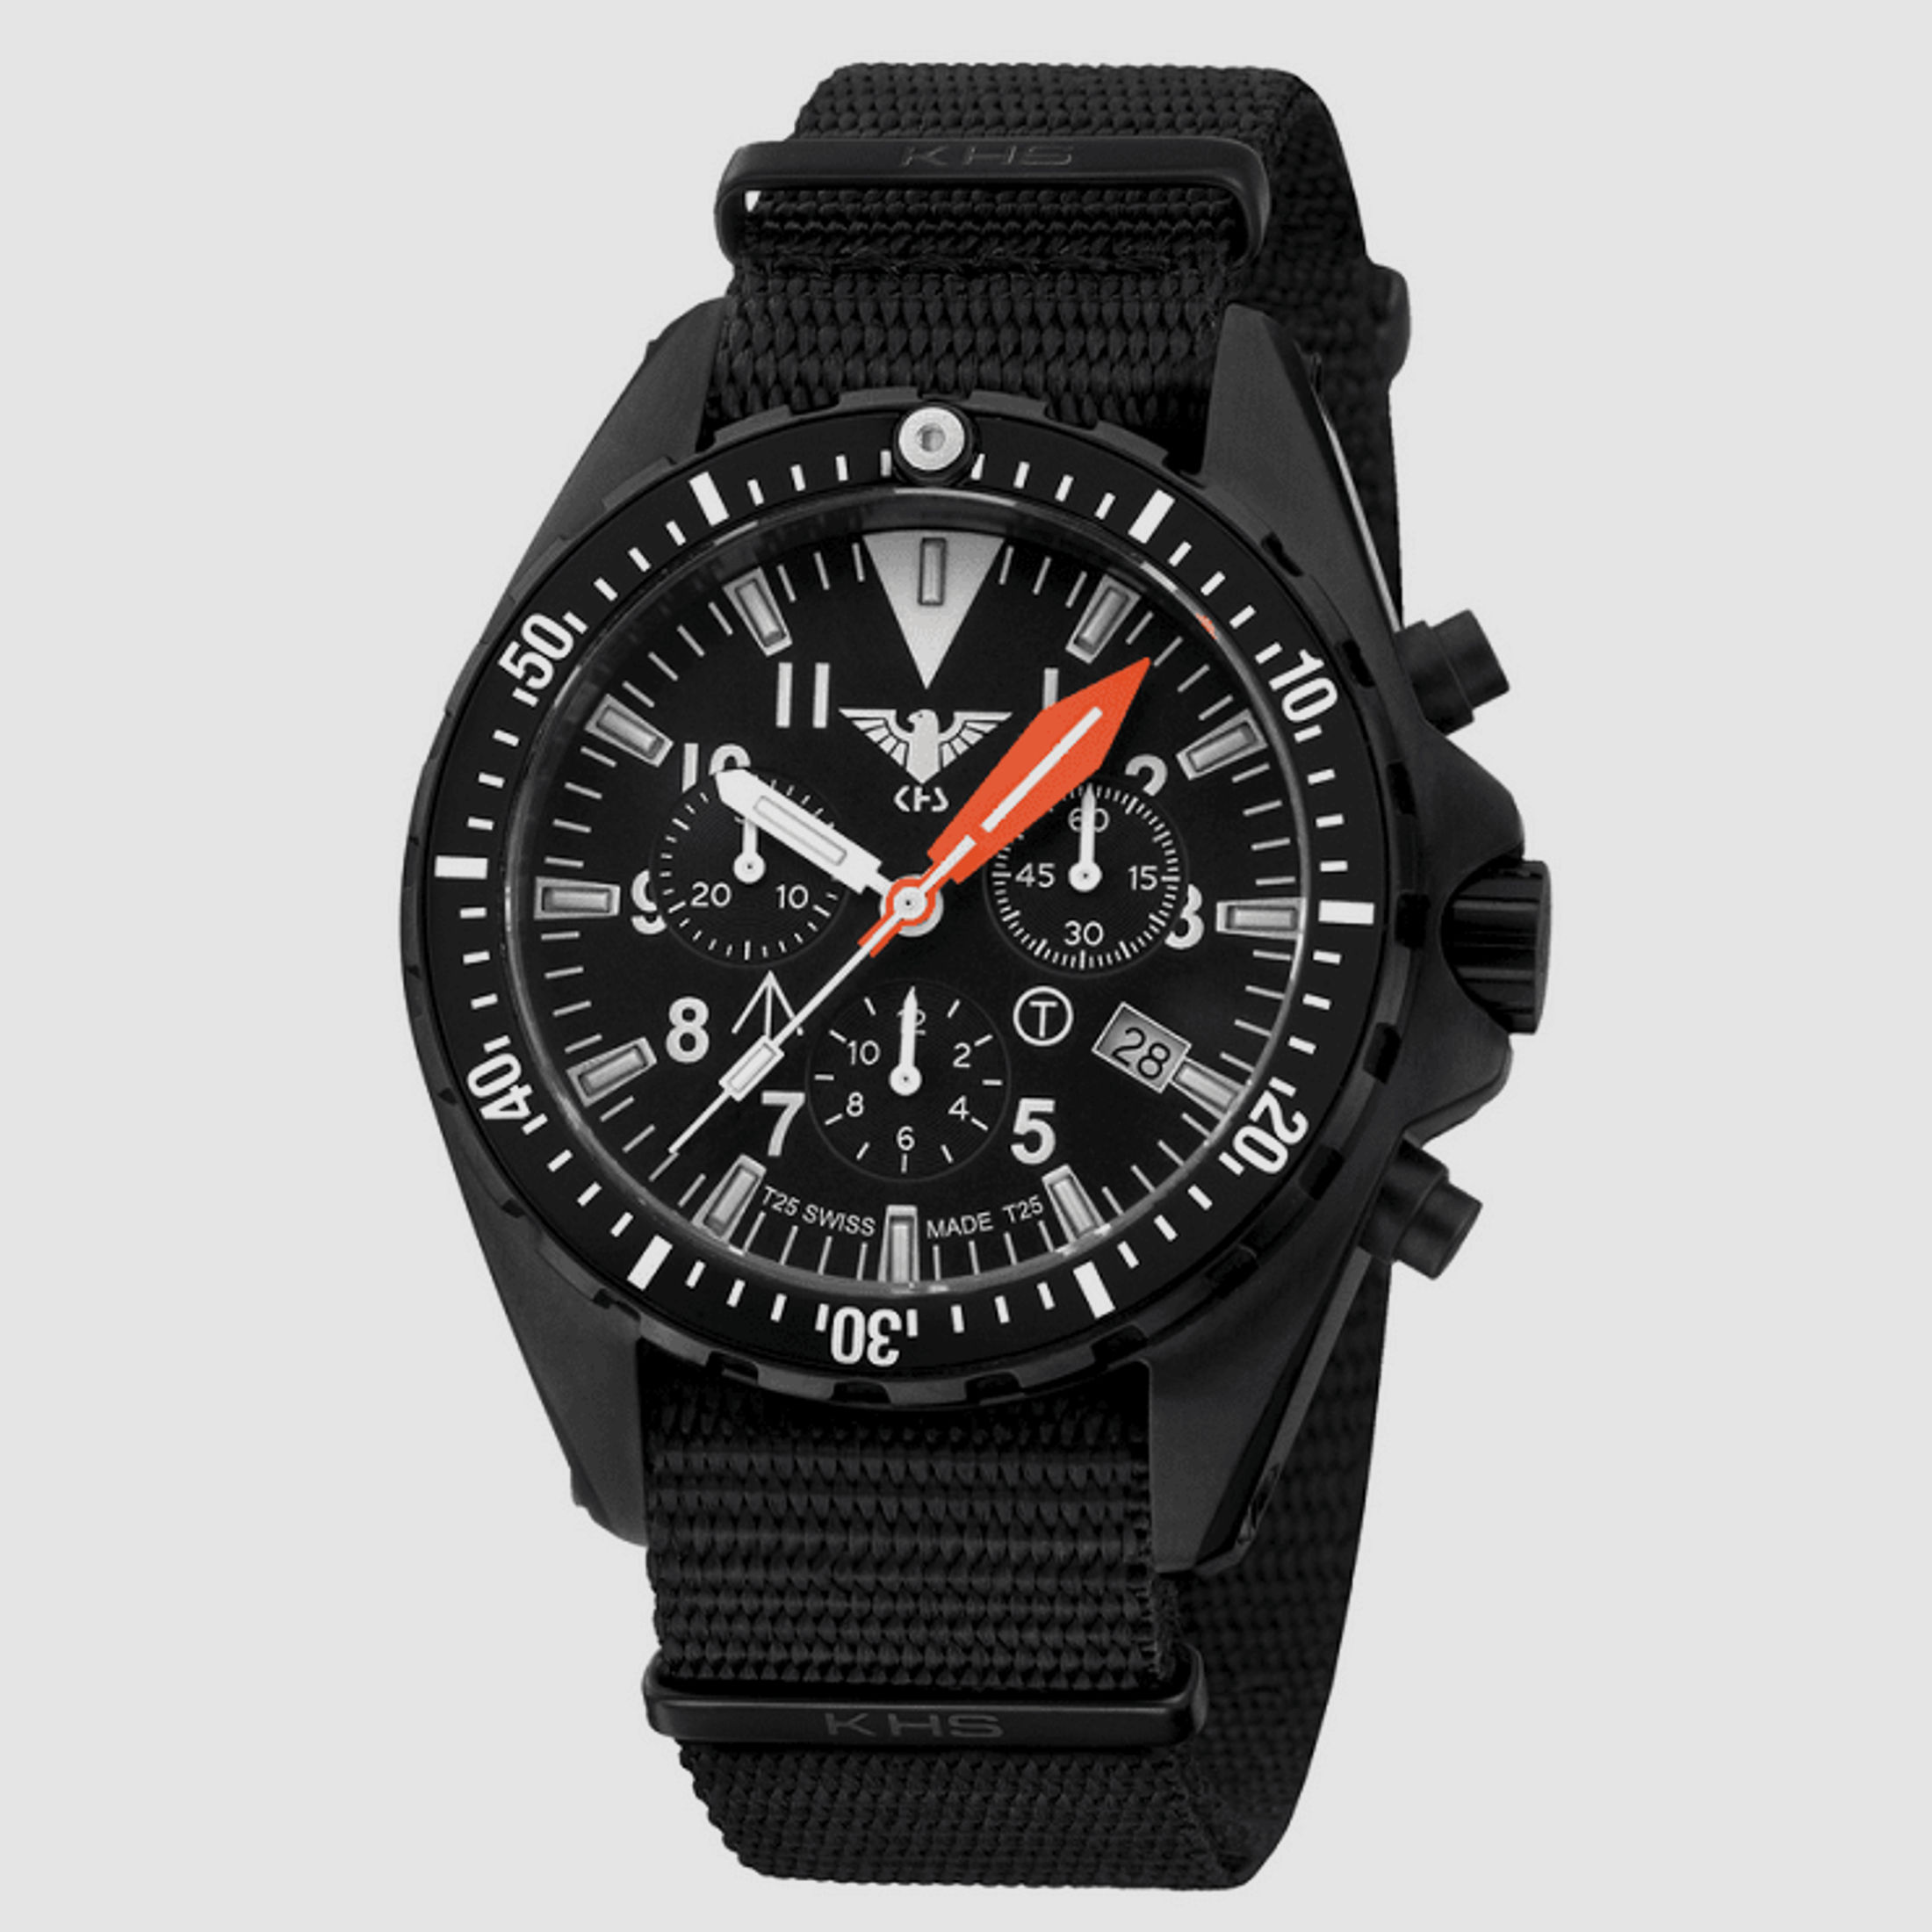 KHS Missiontimer 3 Chronograph Tactical Watch